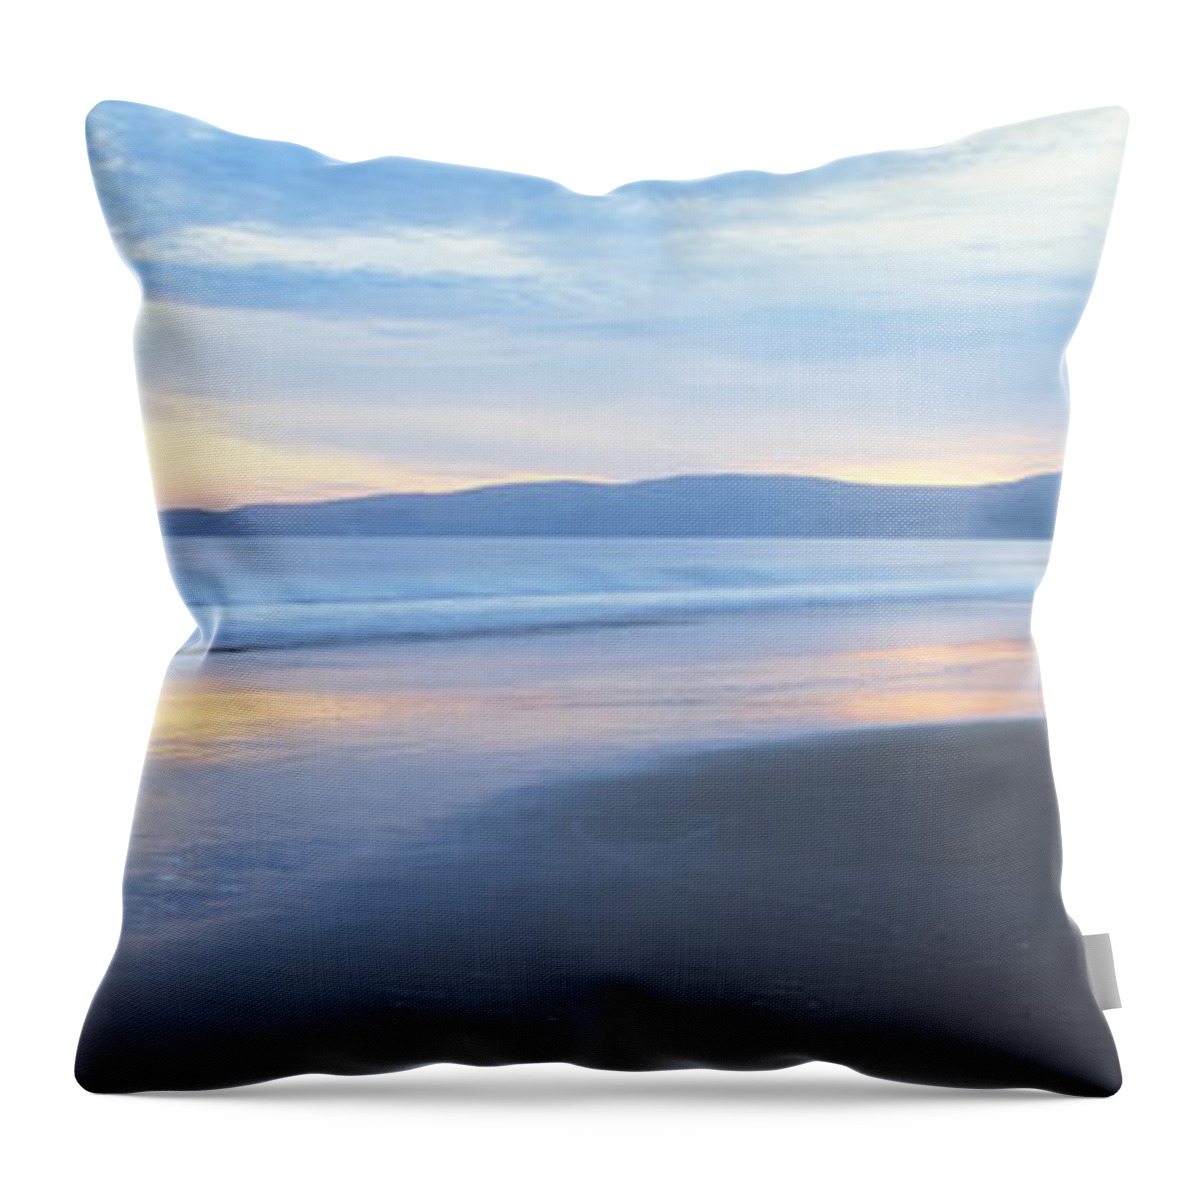 Photography Throw Pillow featuring the photograph Seascape Point Reyes, California, Usa by Panoramic Images